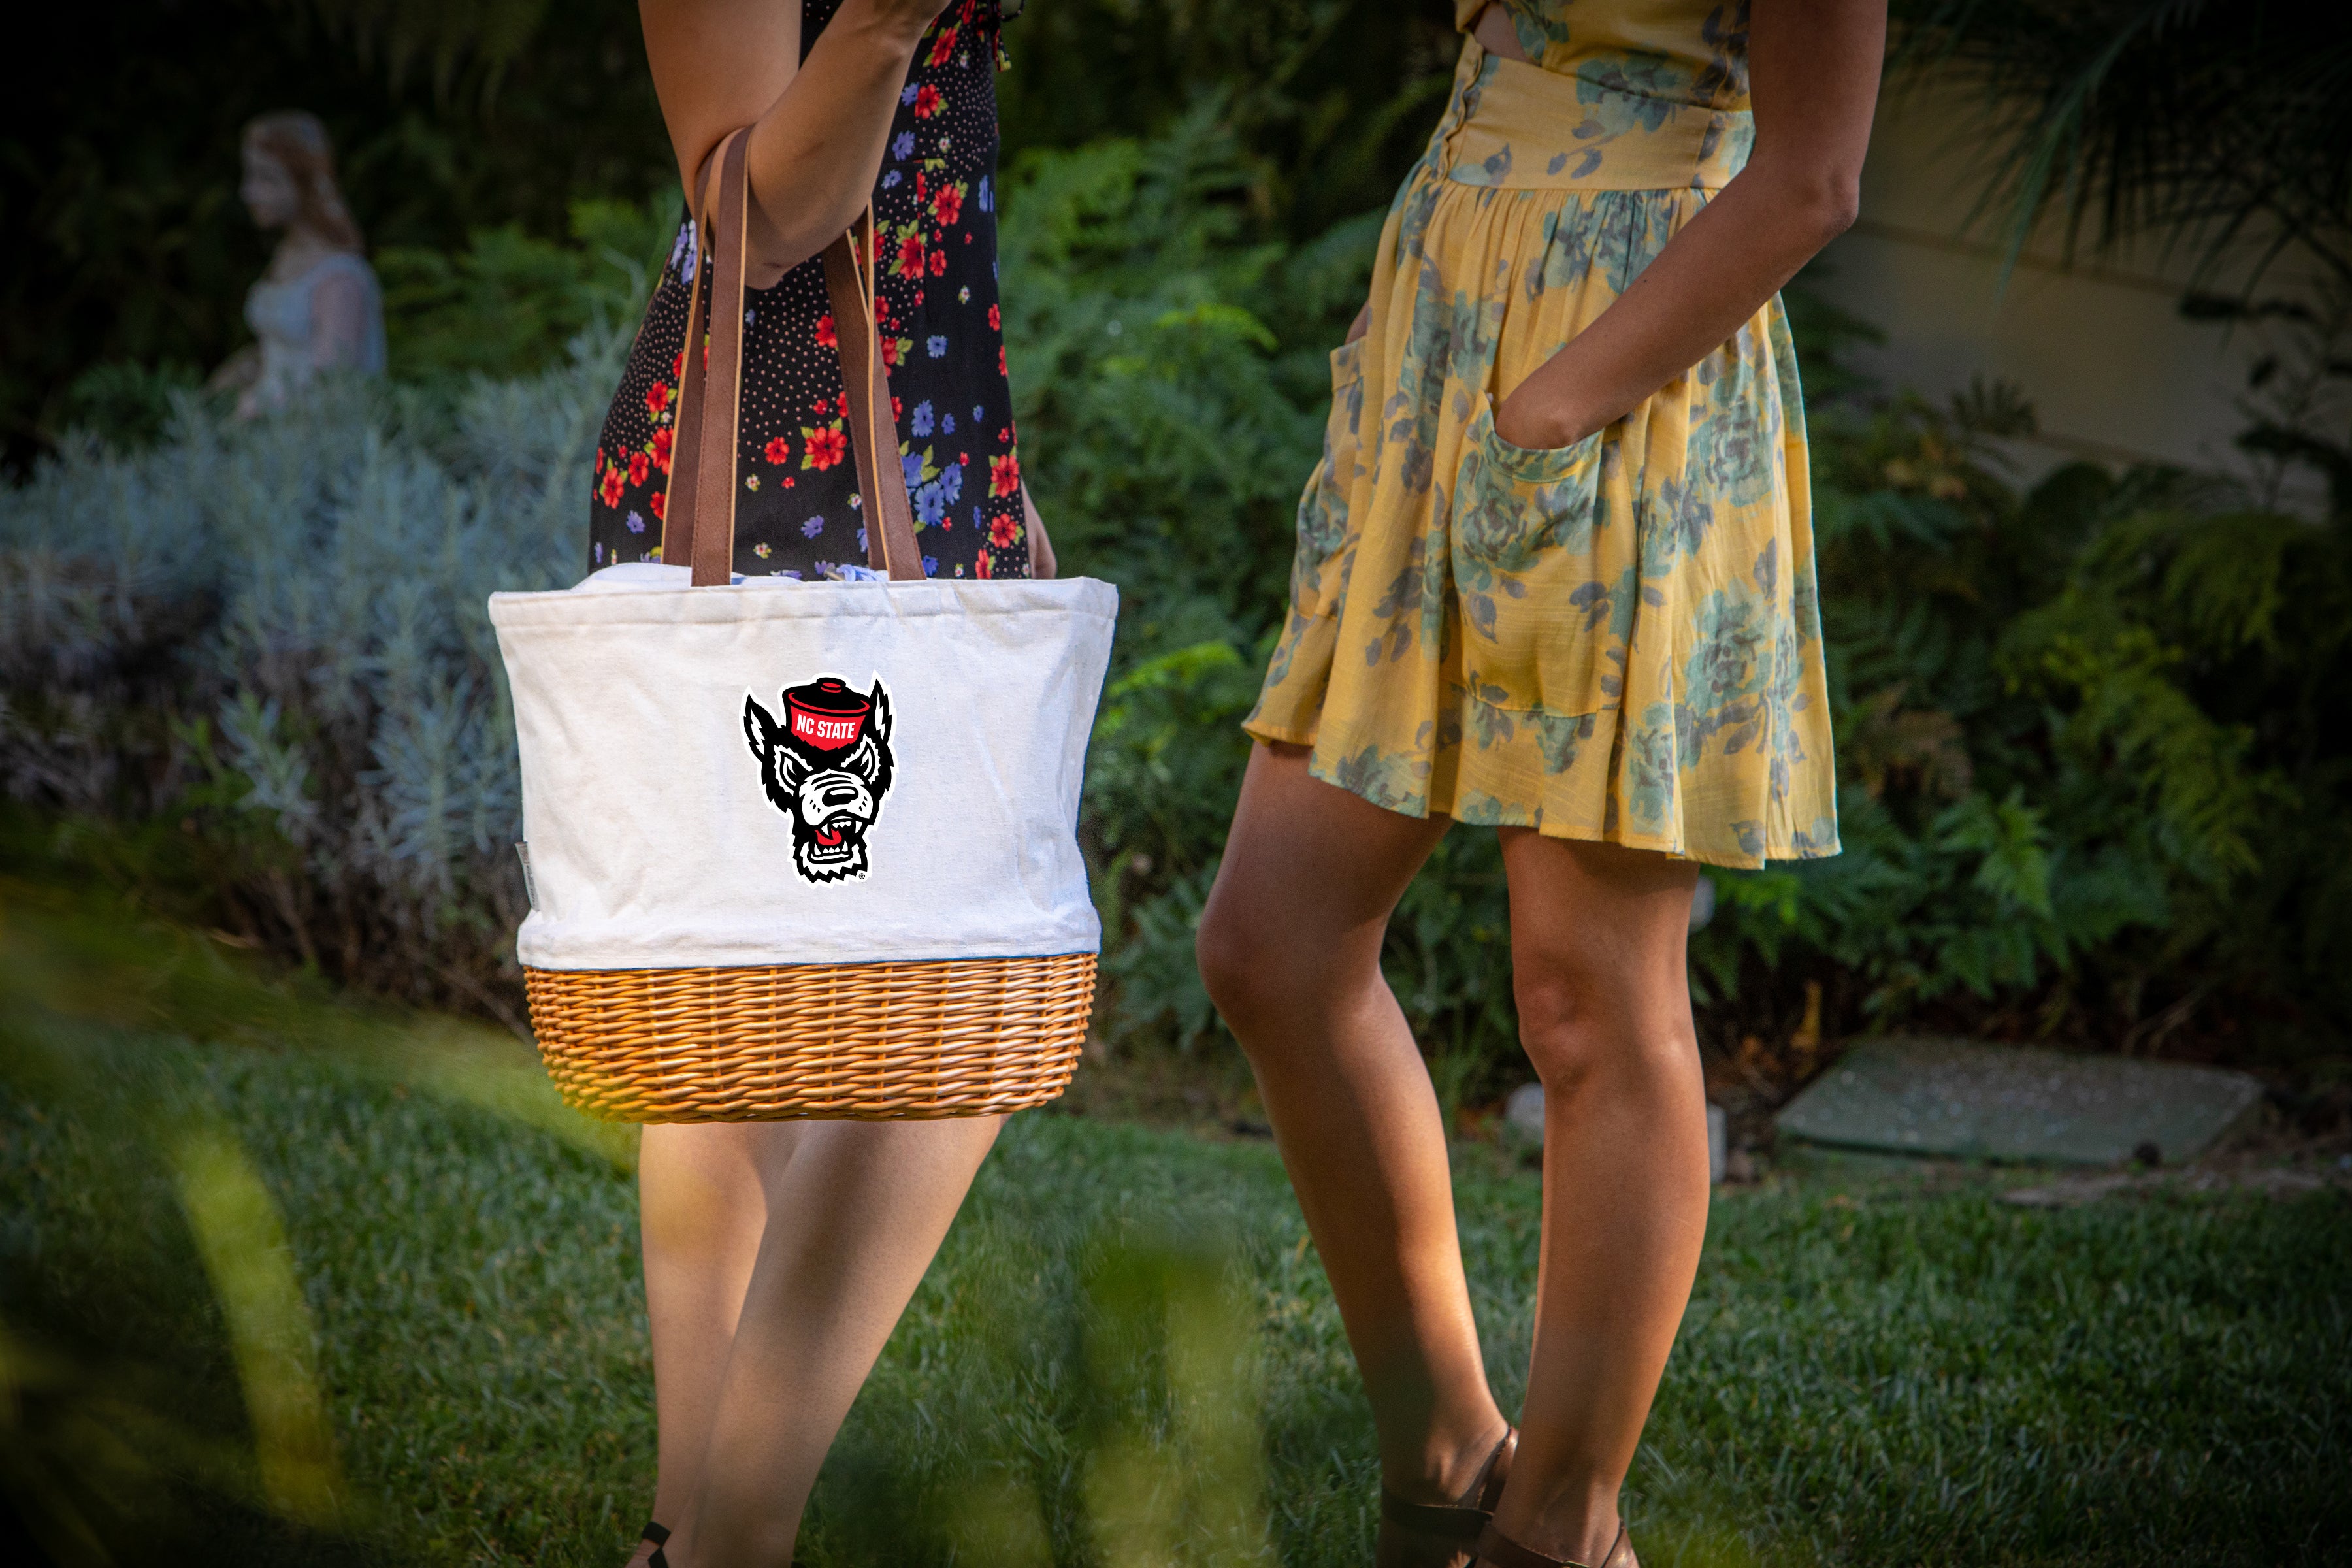 NC State Wolfpack - Coronado Canvas and Willow Basket Tote